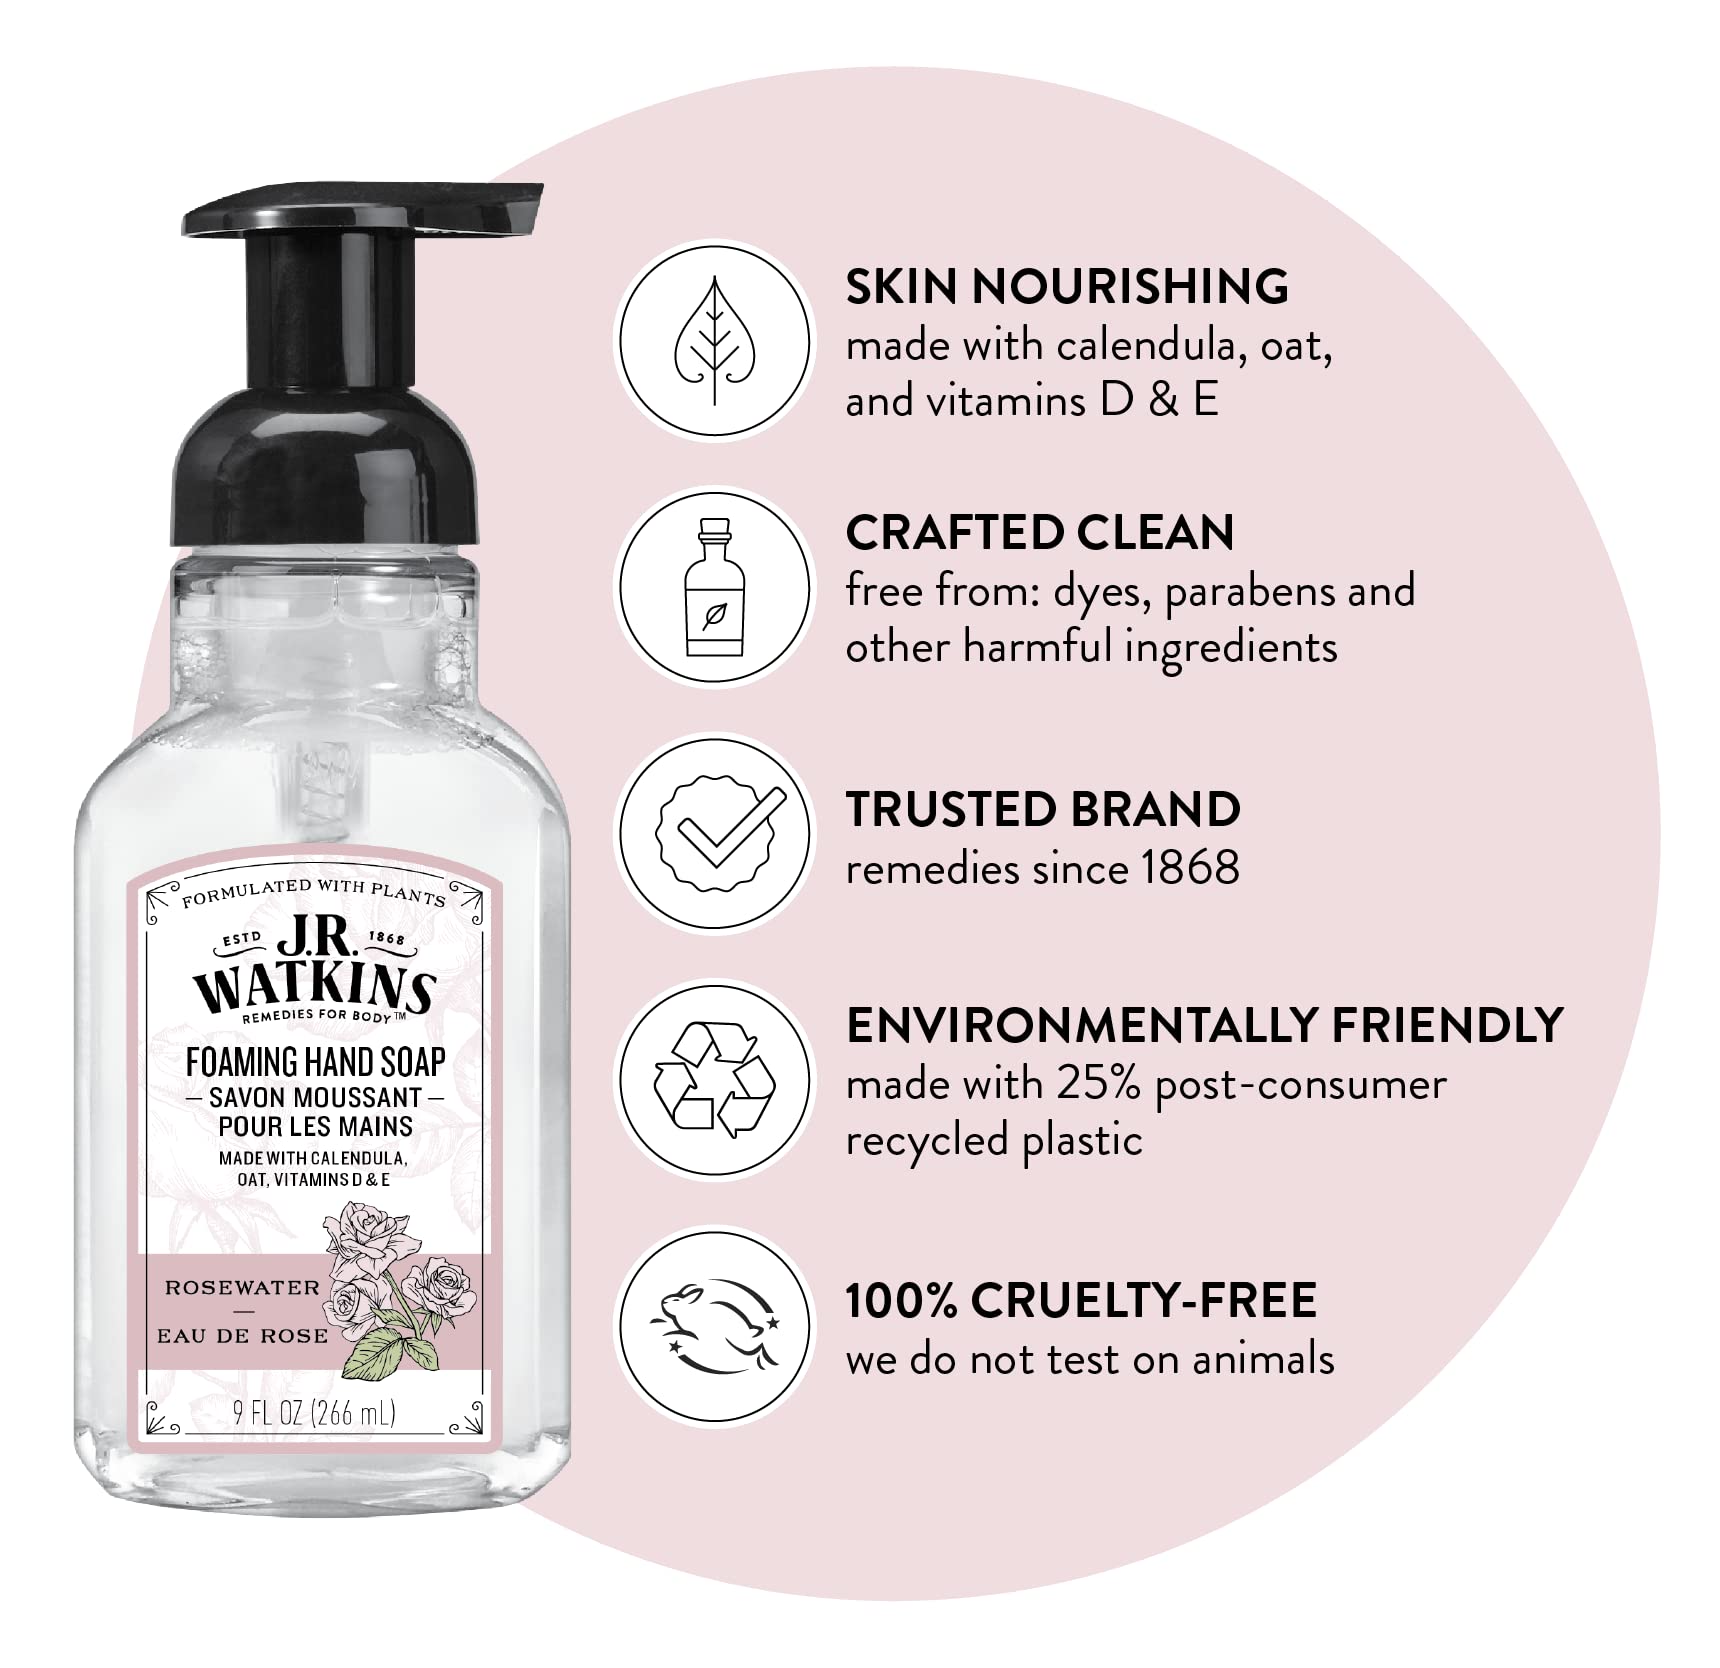 J.R. Watkins Foaming Hand Soap with Pump Dispenser, Moisturizing Foam Hand Wash, All Natural, Alcohol-Free, Cruelty-Free, USA Made, Rosewater, 9 fl oz, 3 Pack